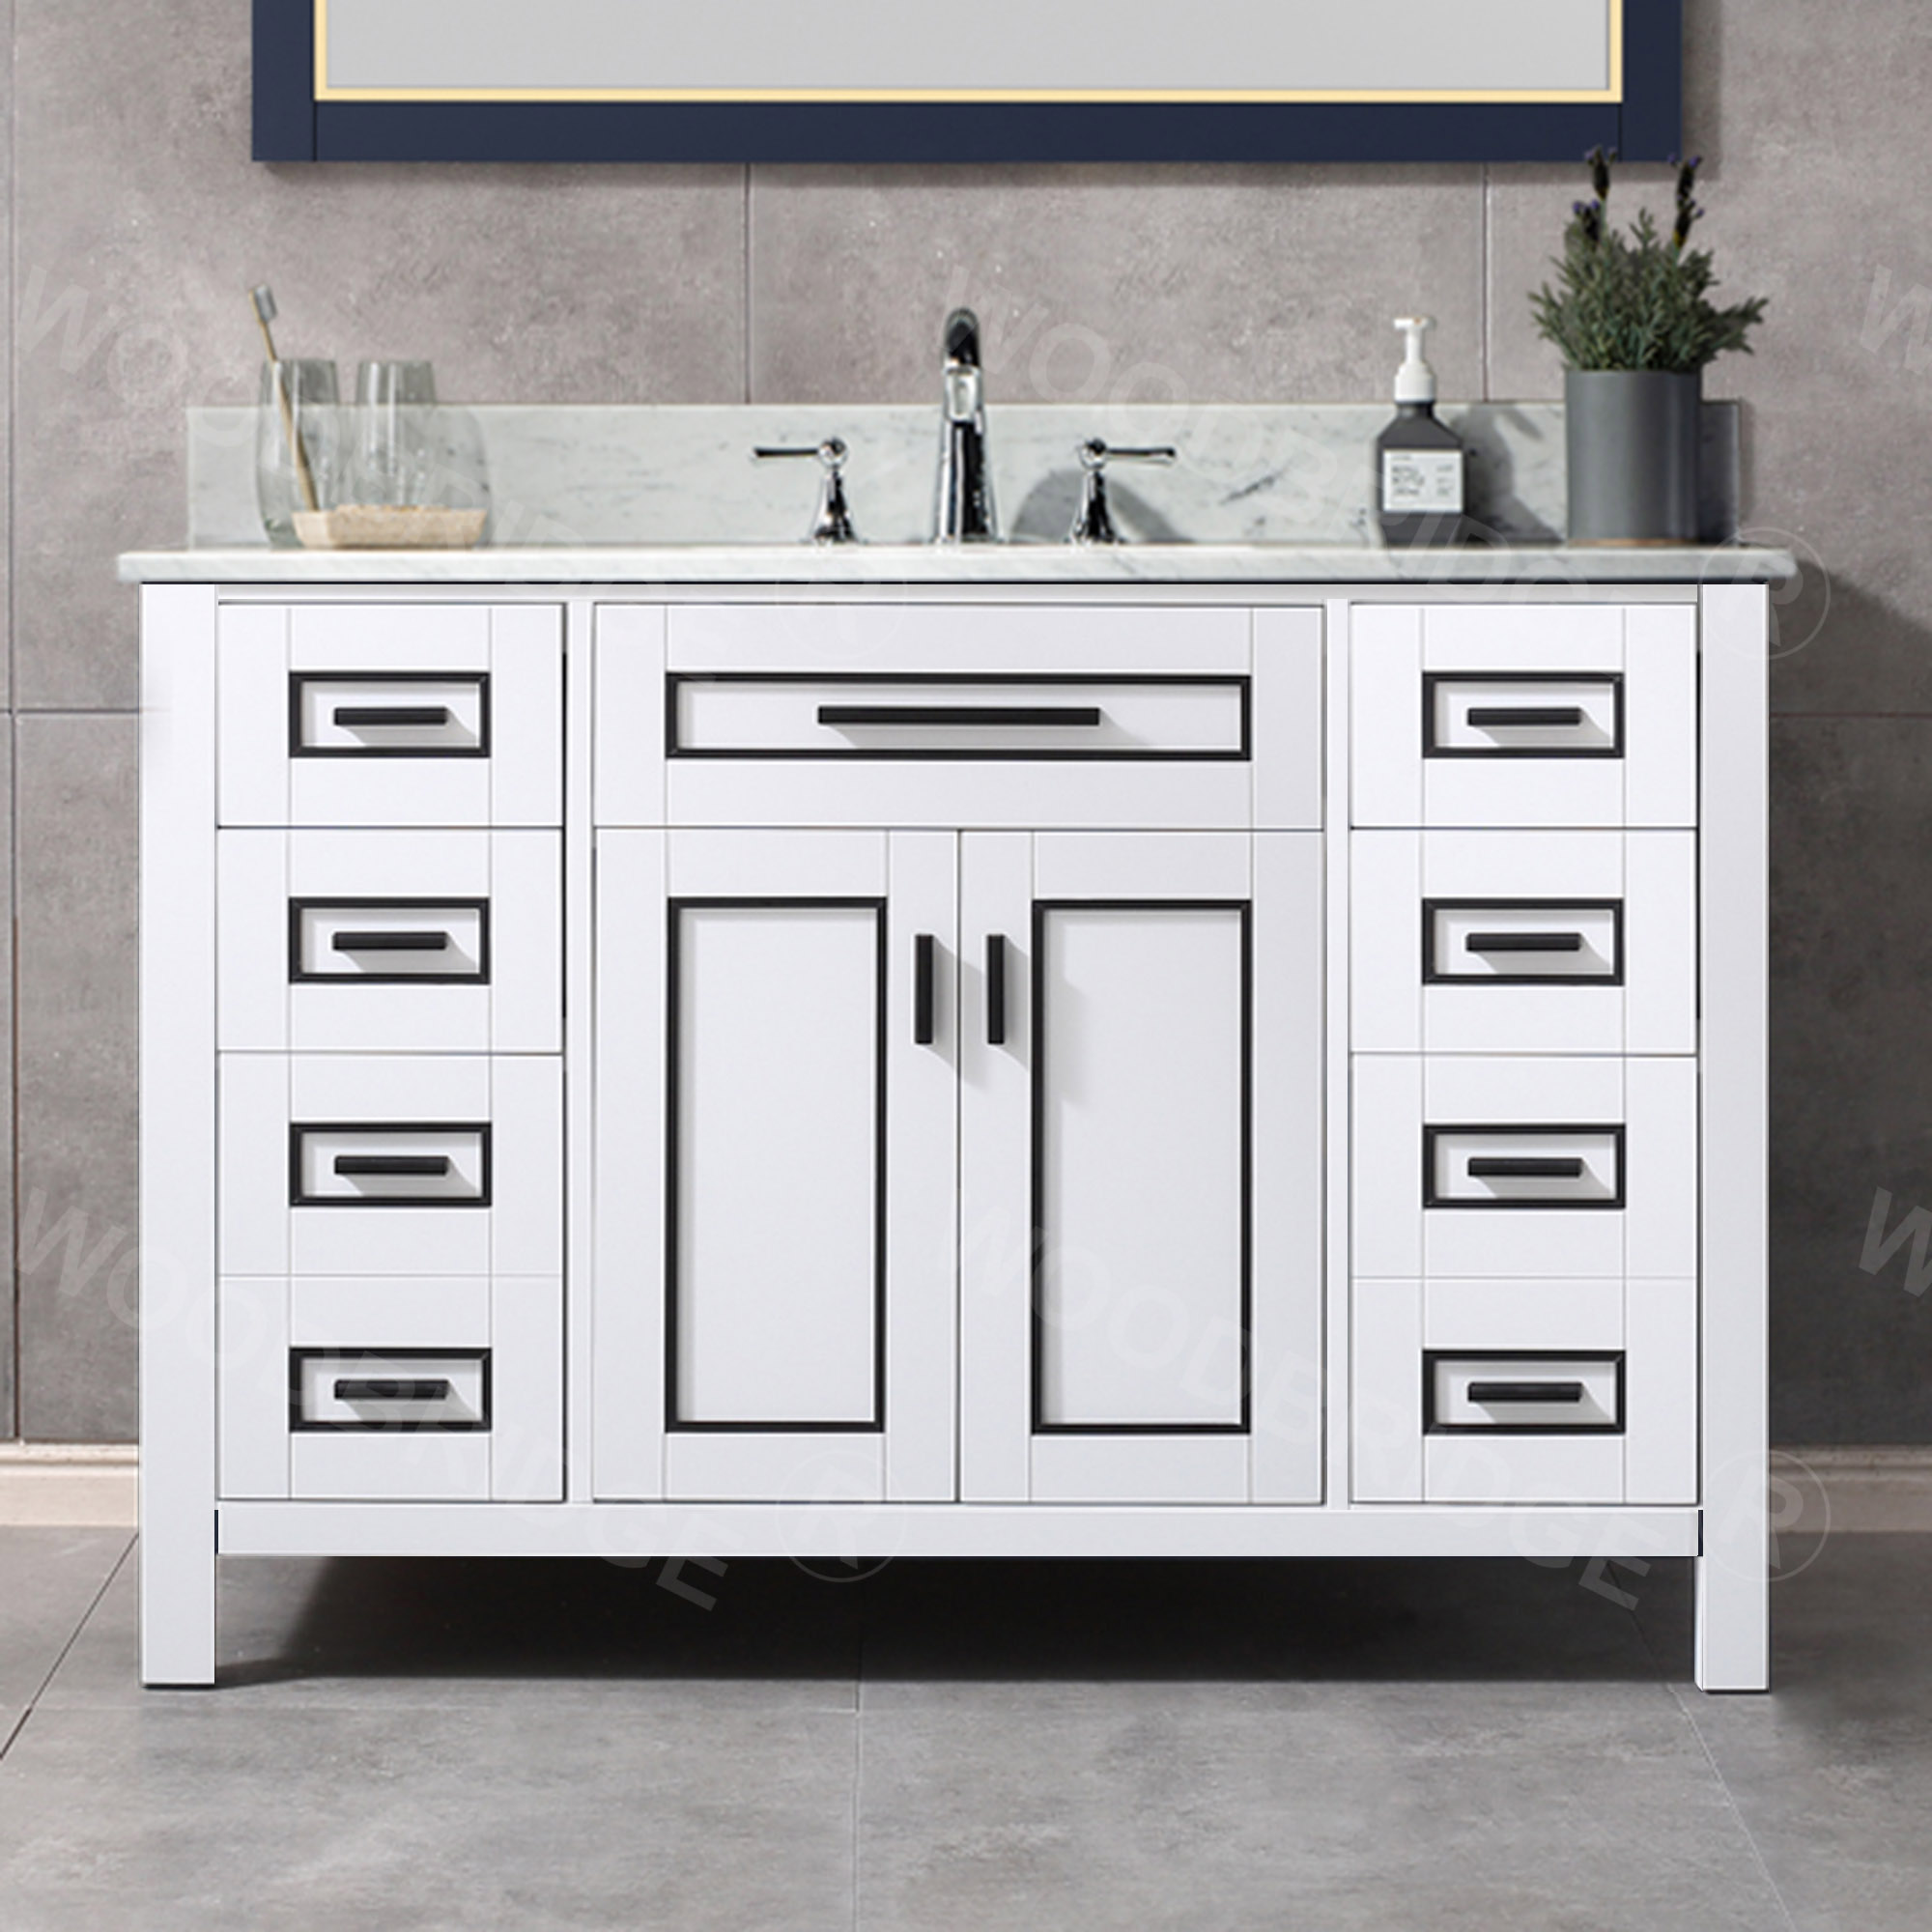 WOODBRIDGE Milan  49” Floor Mounted Single Basin Vanity Set with Solid Wood Cabinet in White, and Carrara White Marble Vanity Top with Pre-installed Undermount Rectangle Bathroom Sink in White, Pre-Drilled 3-Hole for 4-inch Centerset Faucet